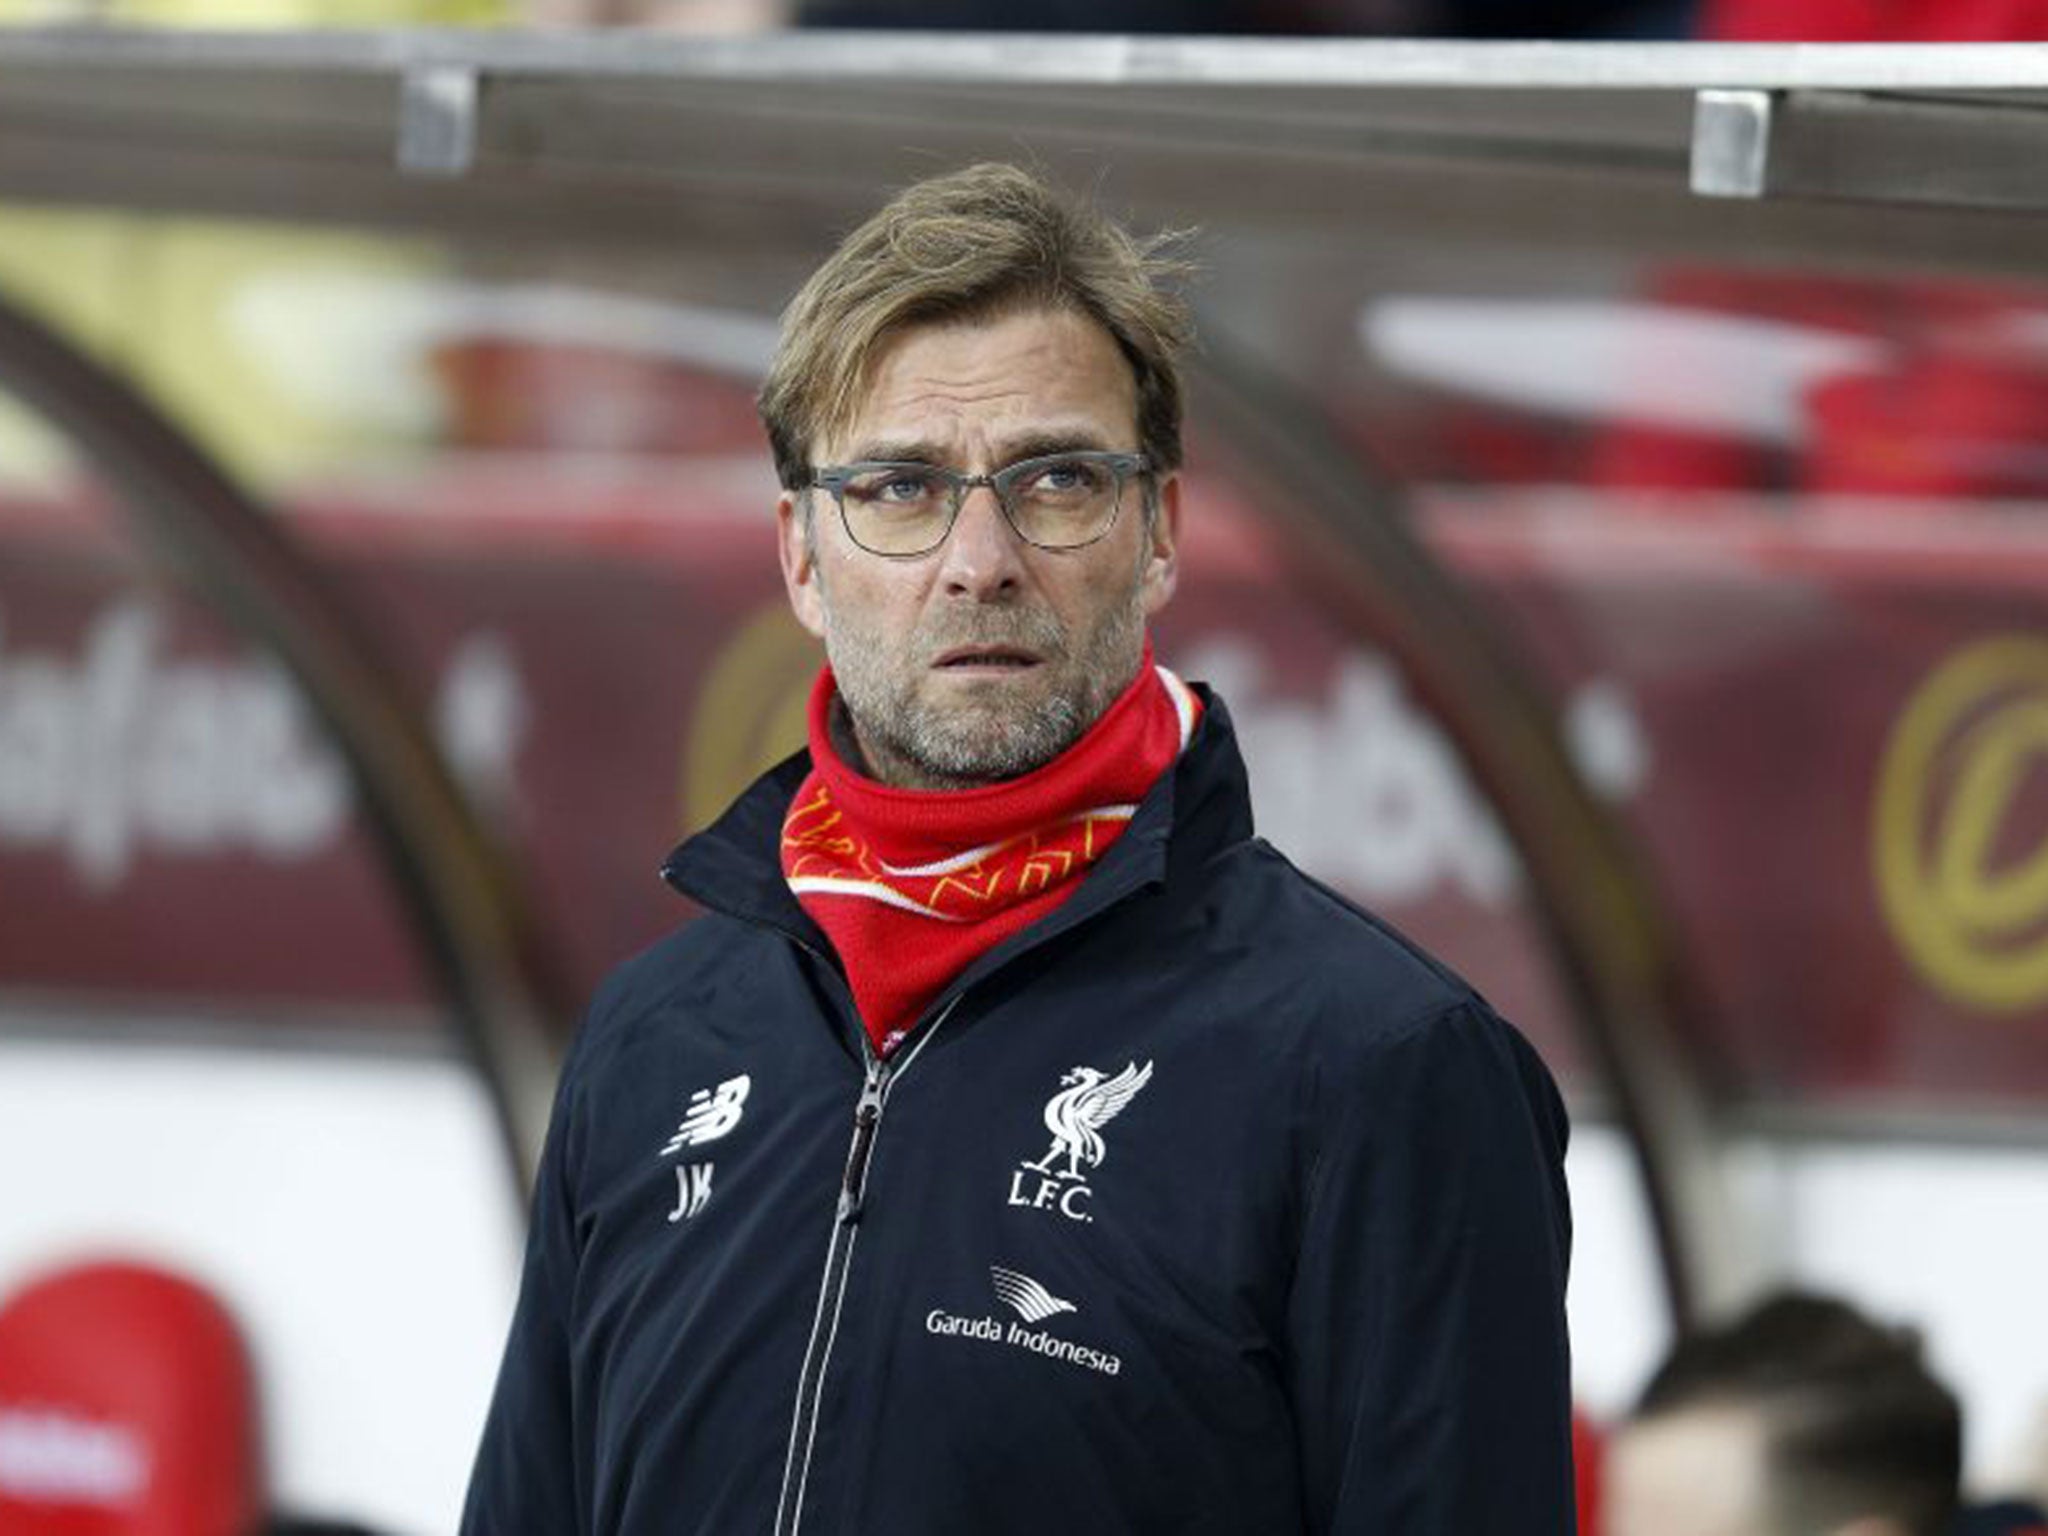 ‘Arsenal are beatable. Not easy, but it’s possible,’ said the Liverpool manager Jürgen Klopp